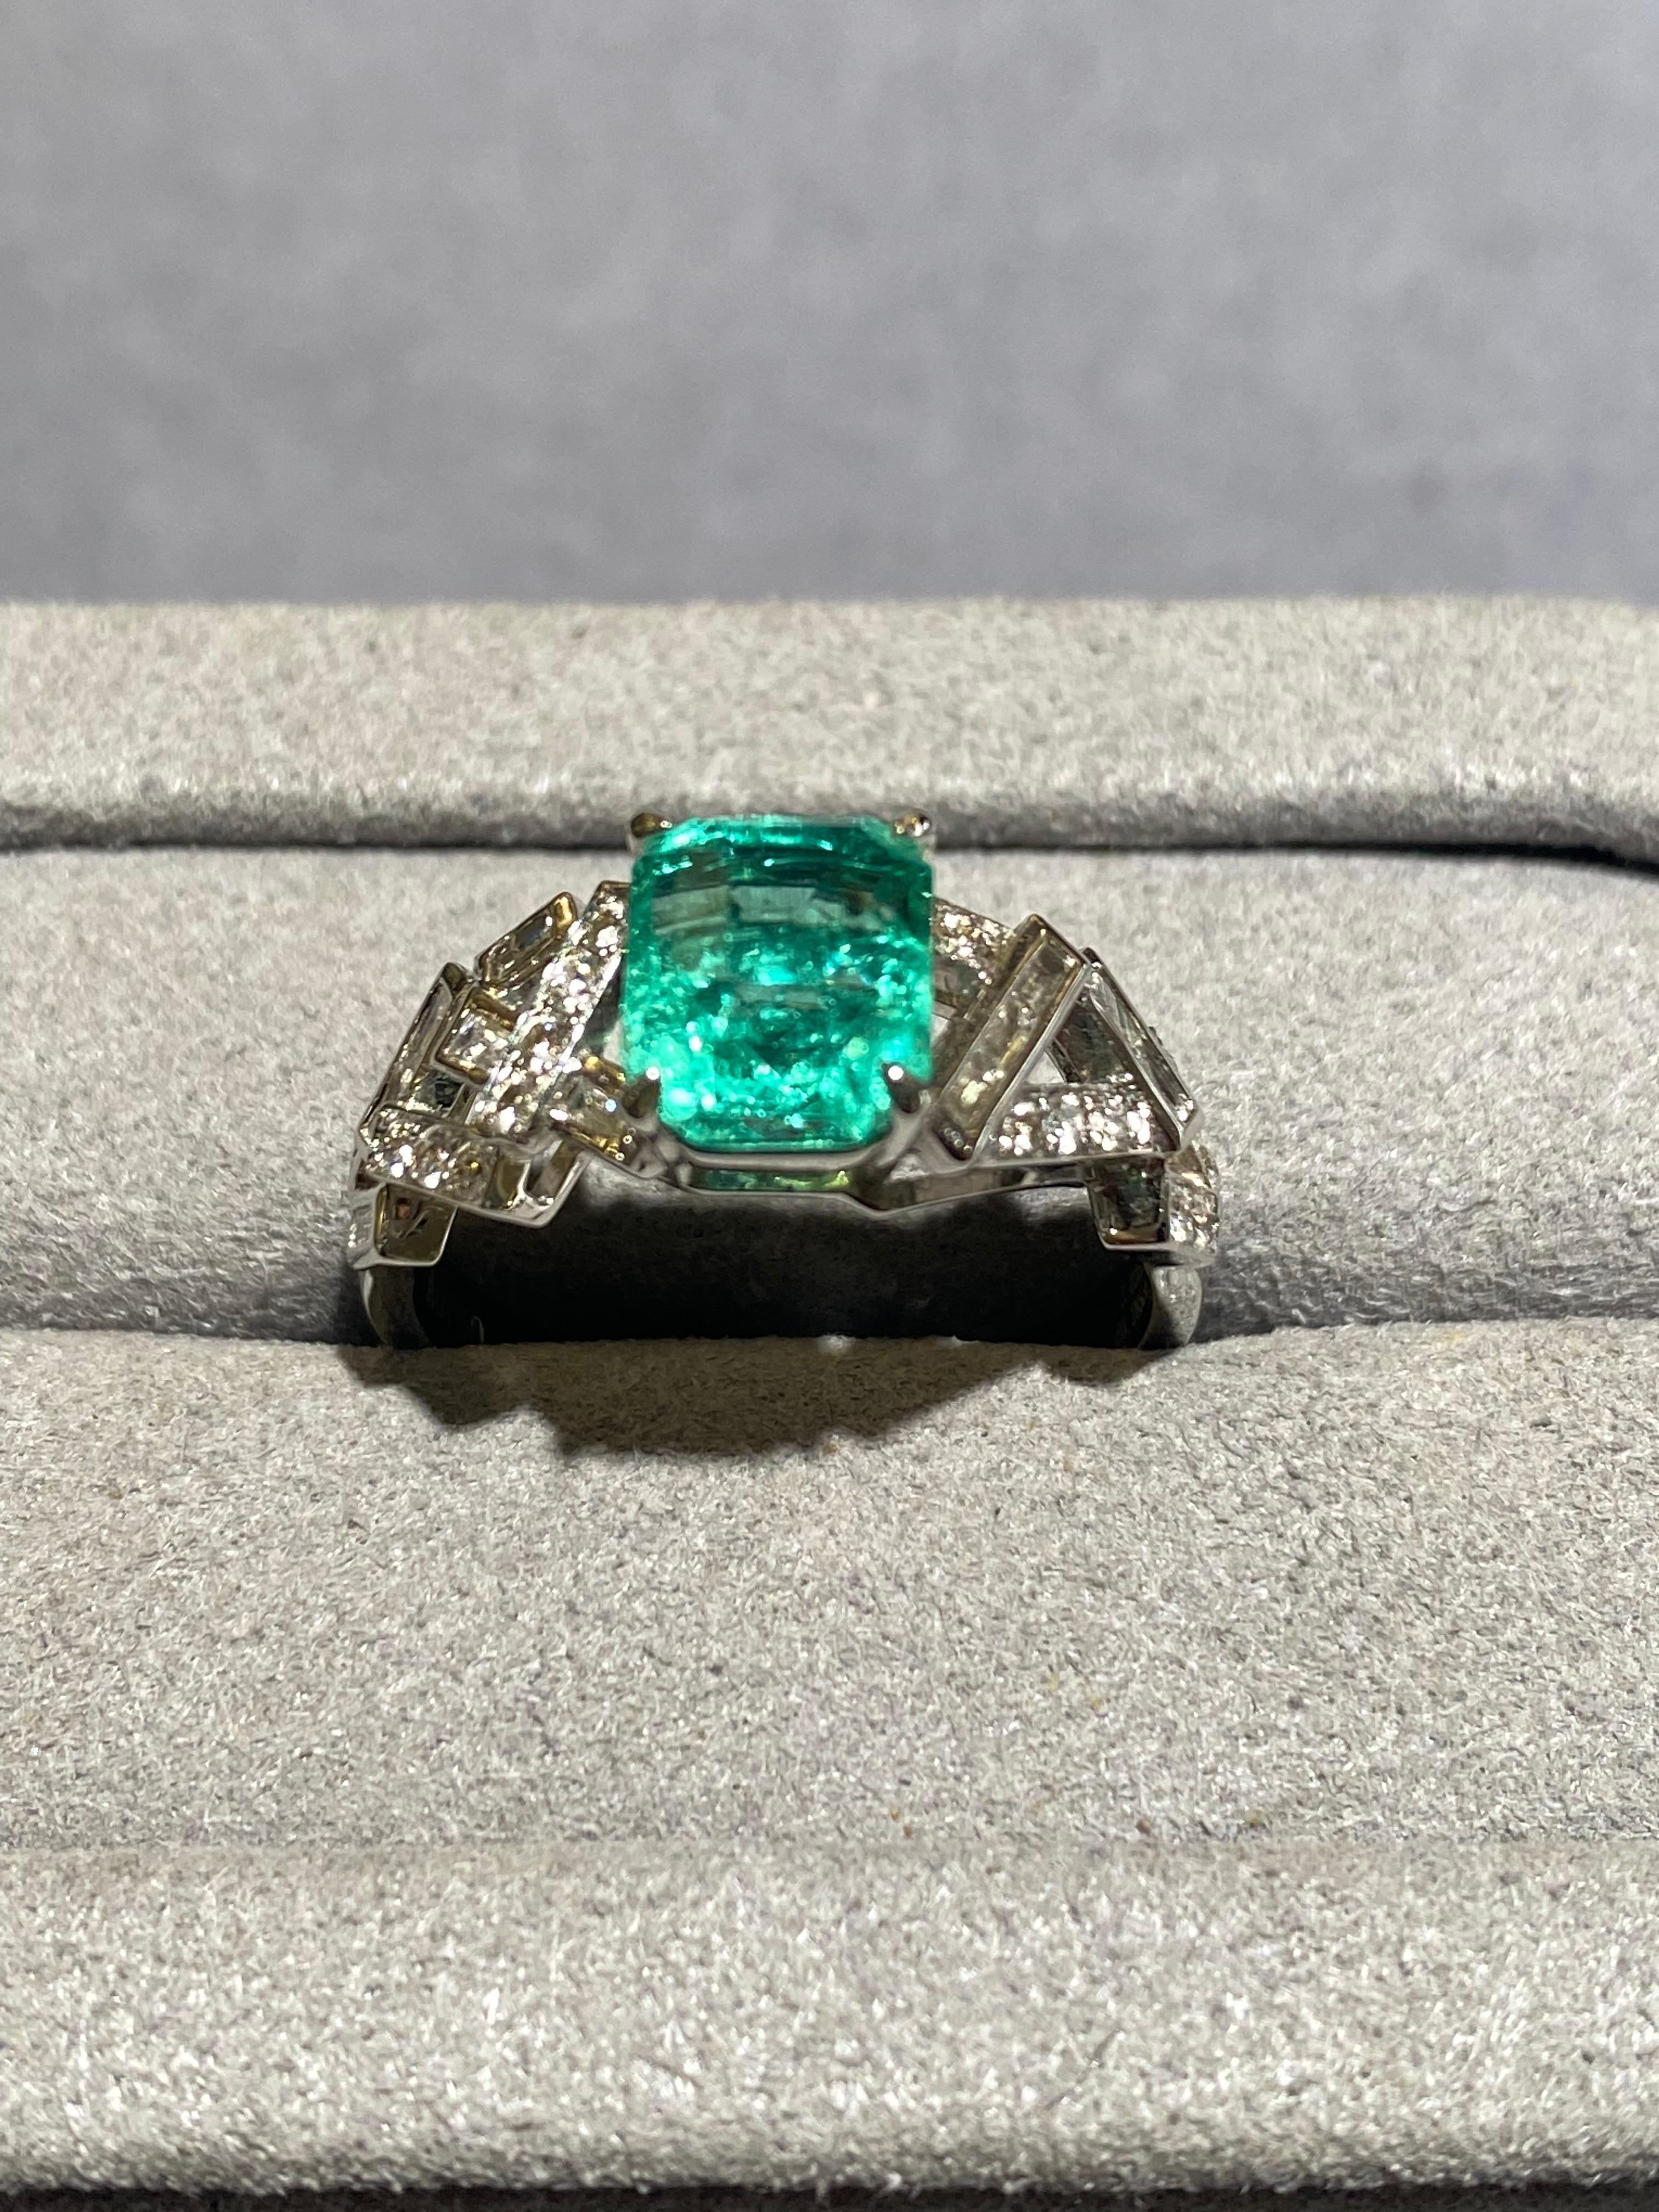 A 2.03 ct Emerald and diamond ring in 18k white gold. It is a geometric design ring with the band of the ring made up by lots of rectangular cube. Those cubes are set with baguette and brilliant cut round diamond. It is a very modern design that